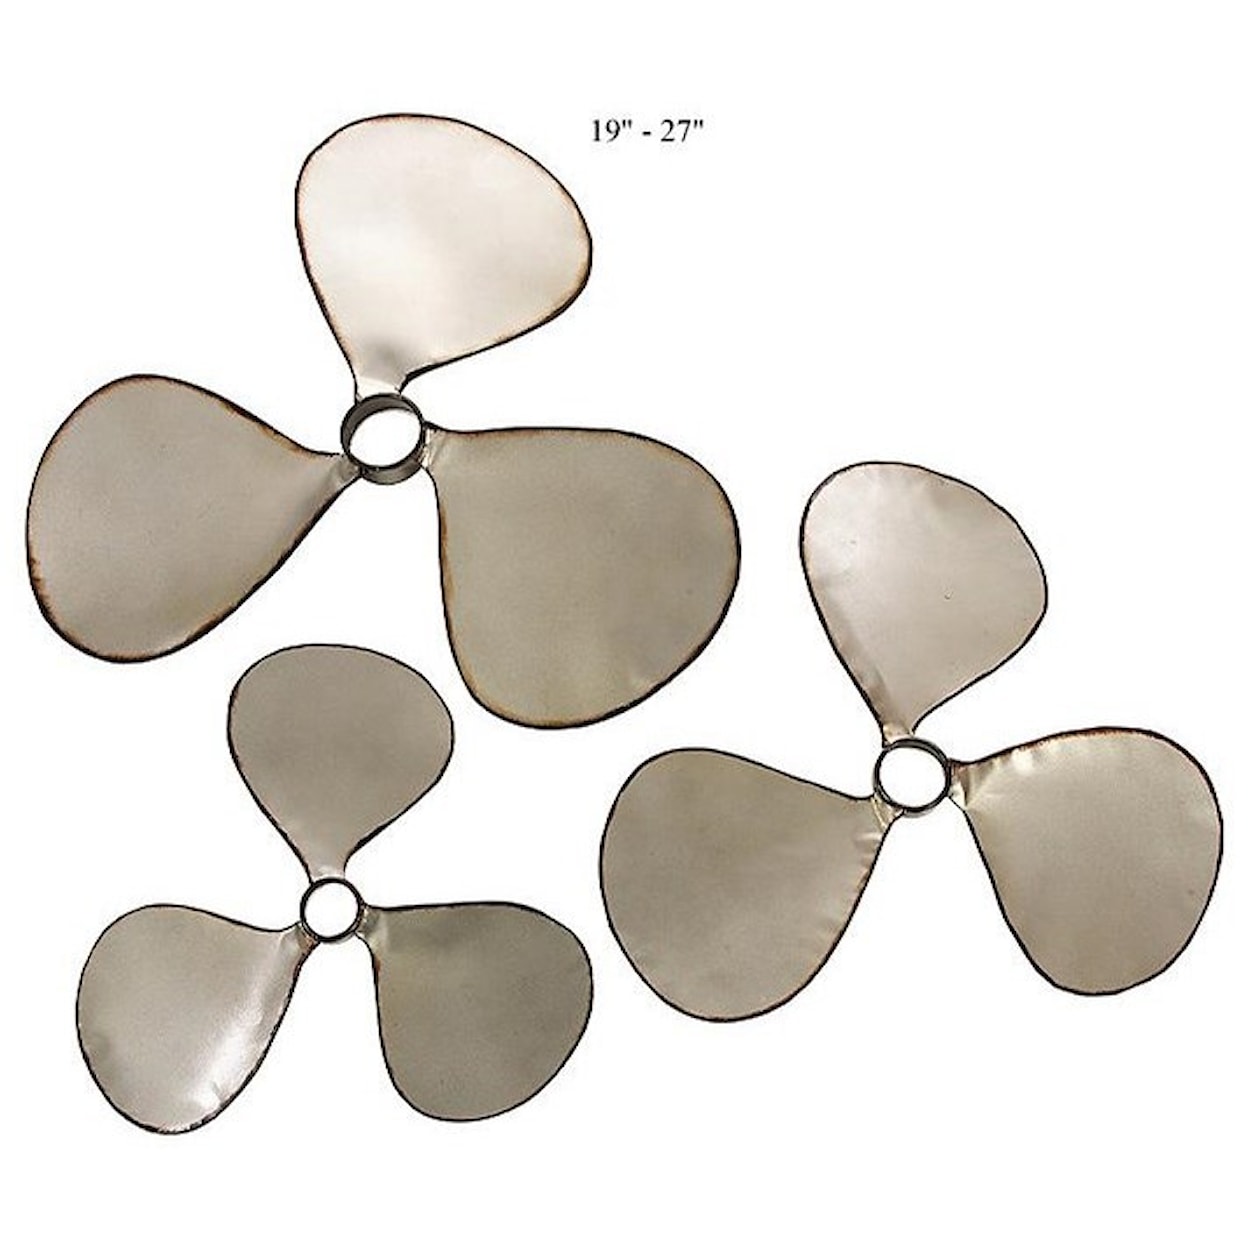 Will's Company Accents Set of 3 Wall Propellers - 19" to 27"